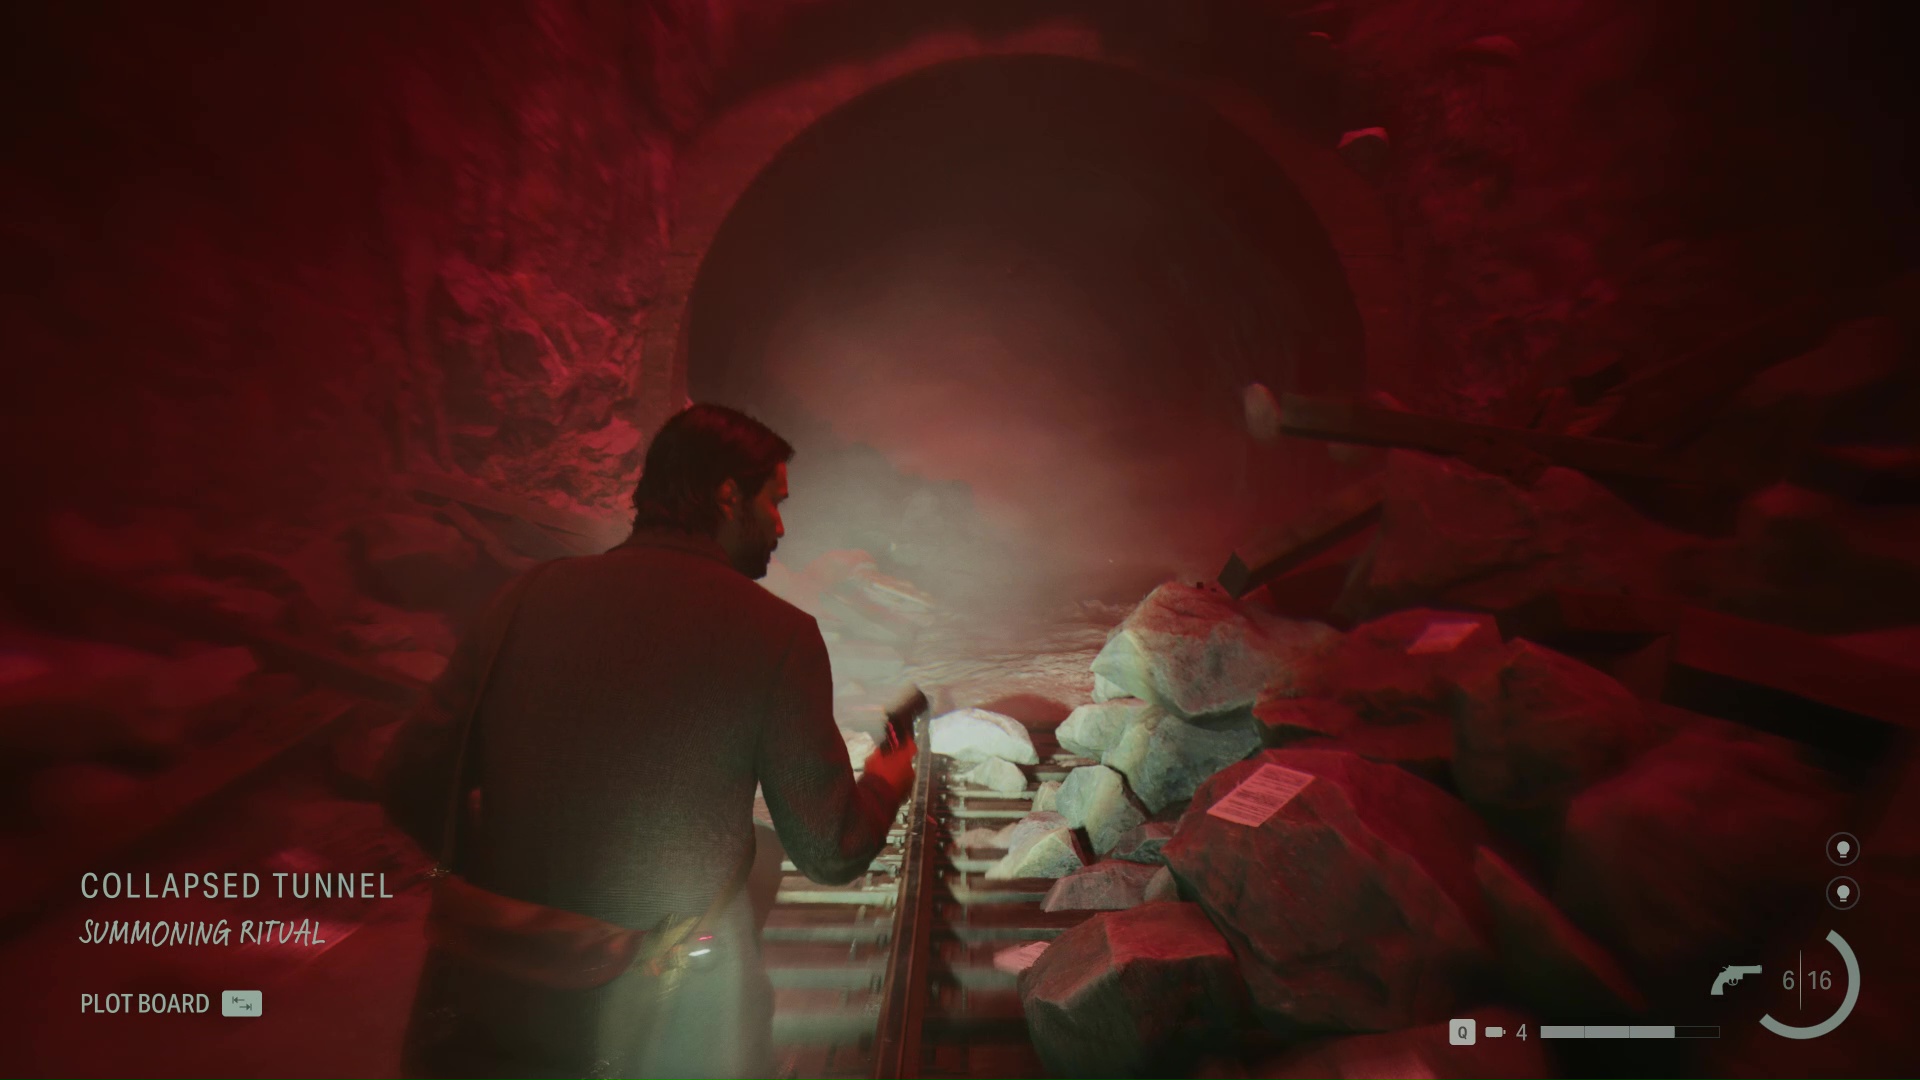 How to complete the subway ritual in Alan Wake 2